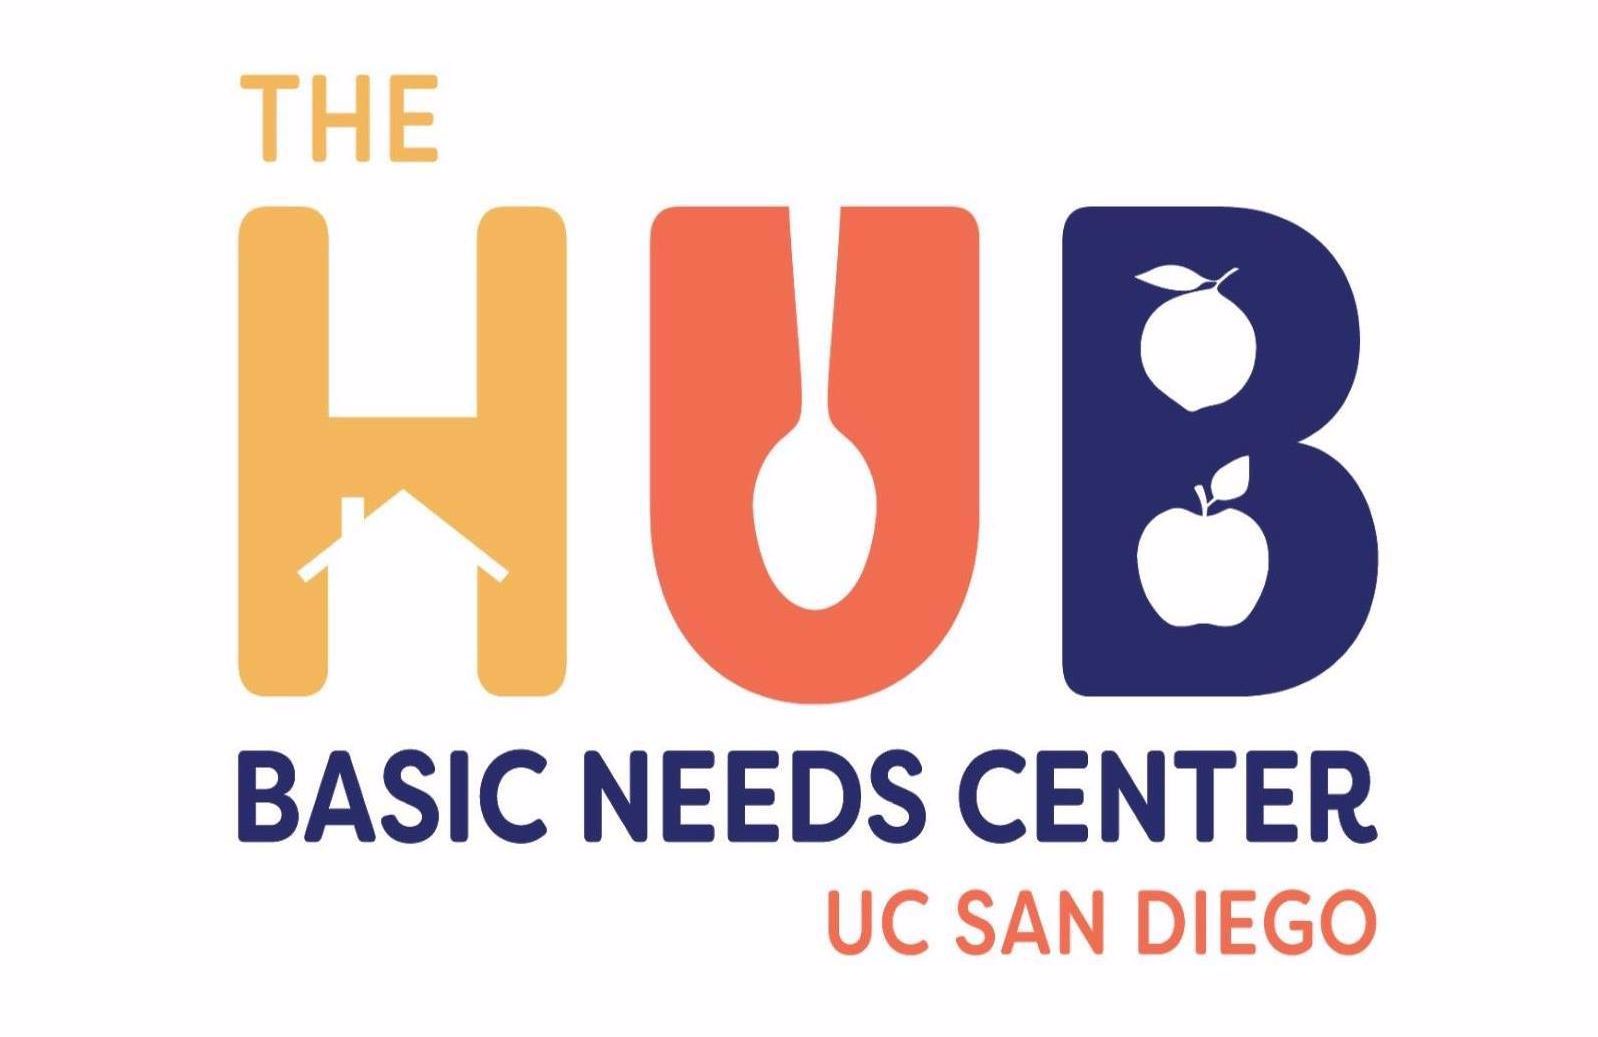 Link to The Basic Needs Center webpage.